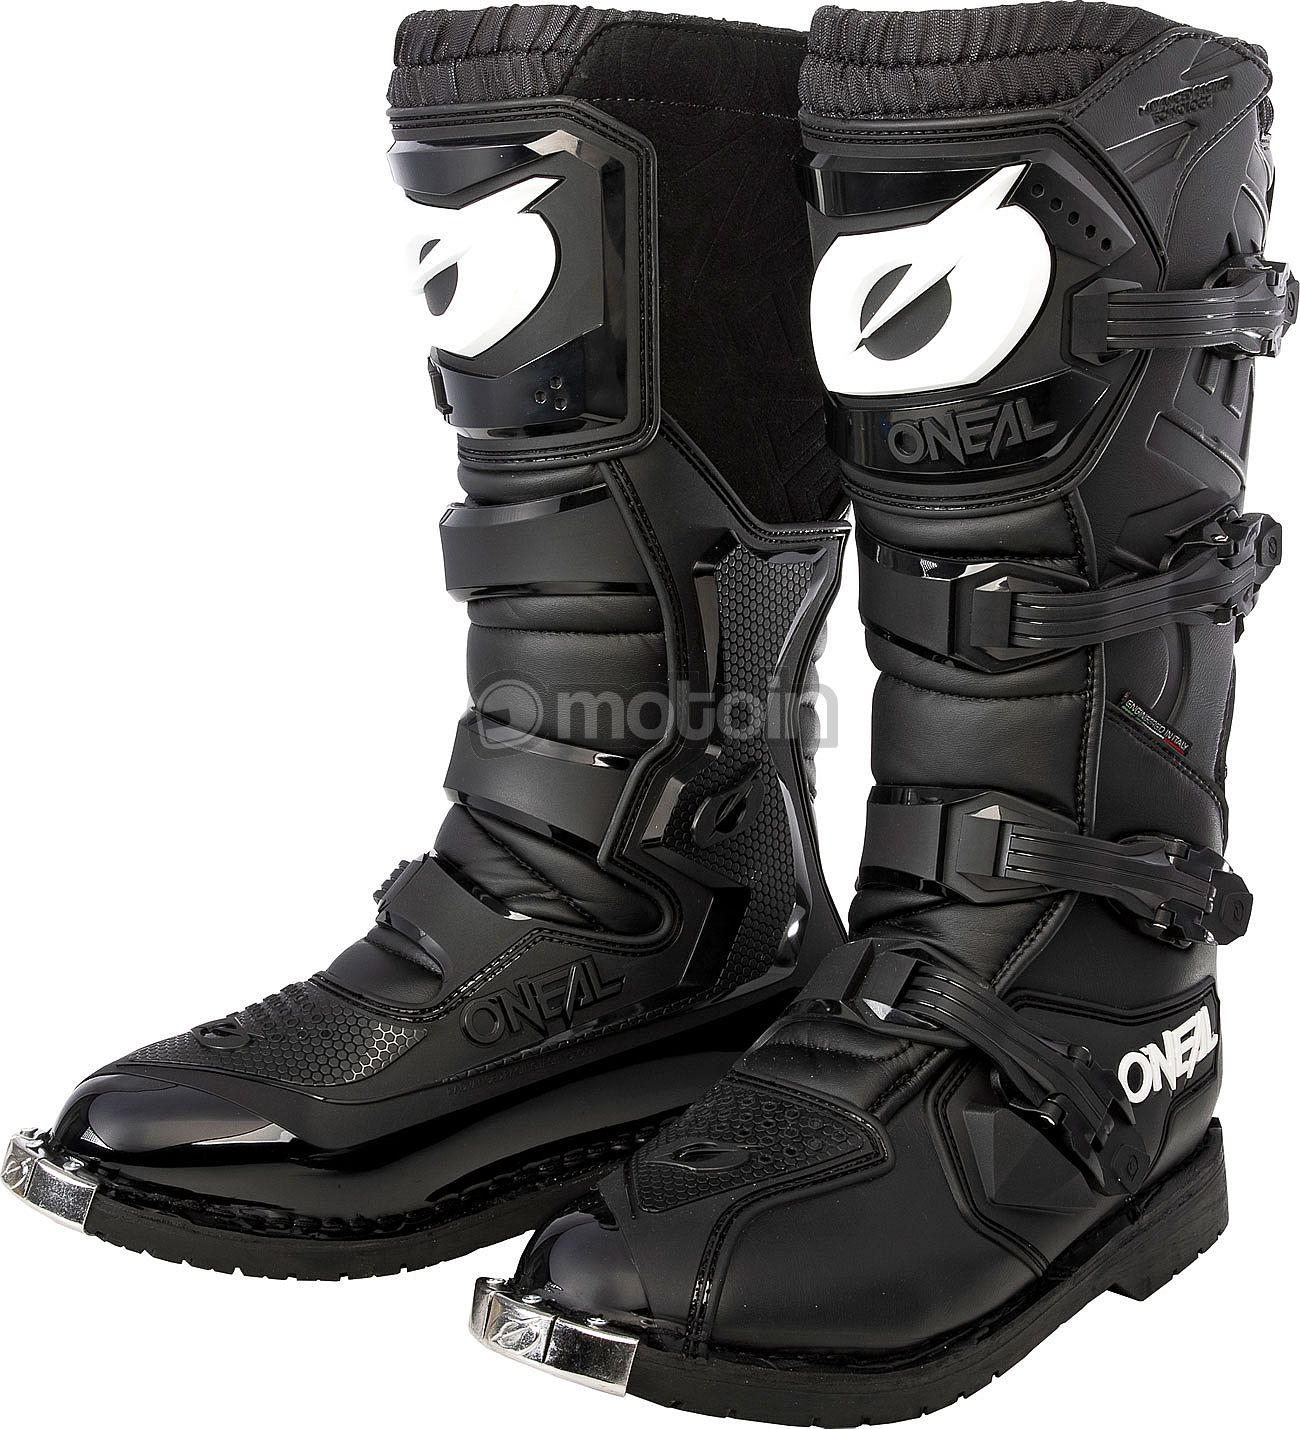 ONeal Rider, Stiefel